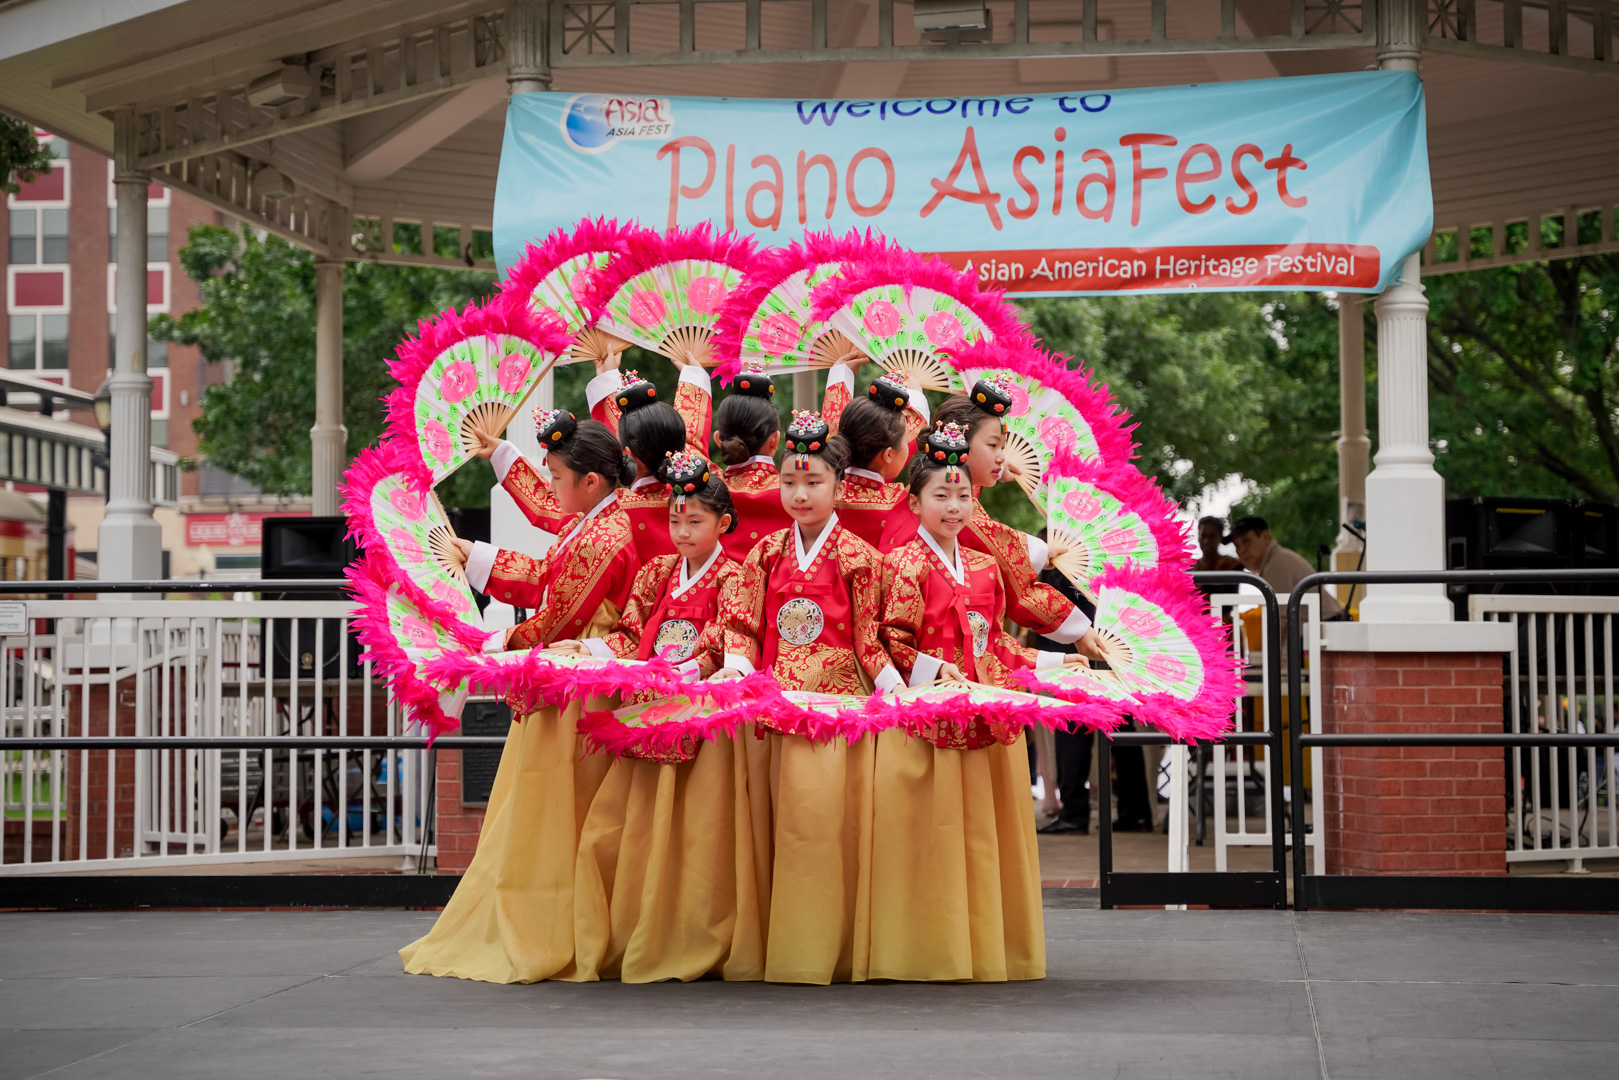 8 young girls in red and gold dresses dance with pink hand fans